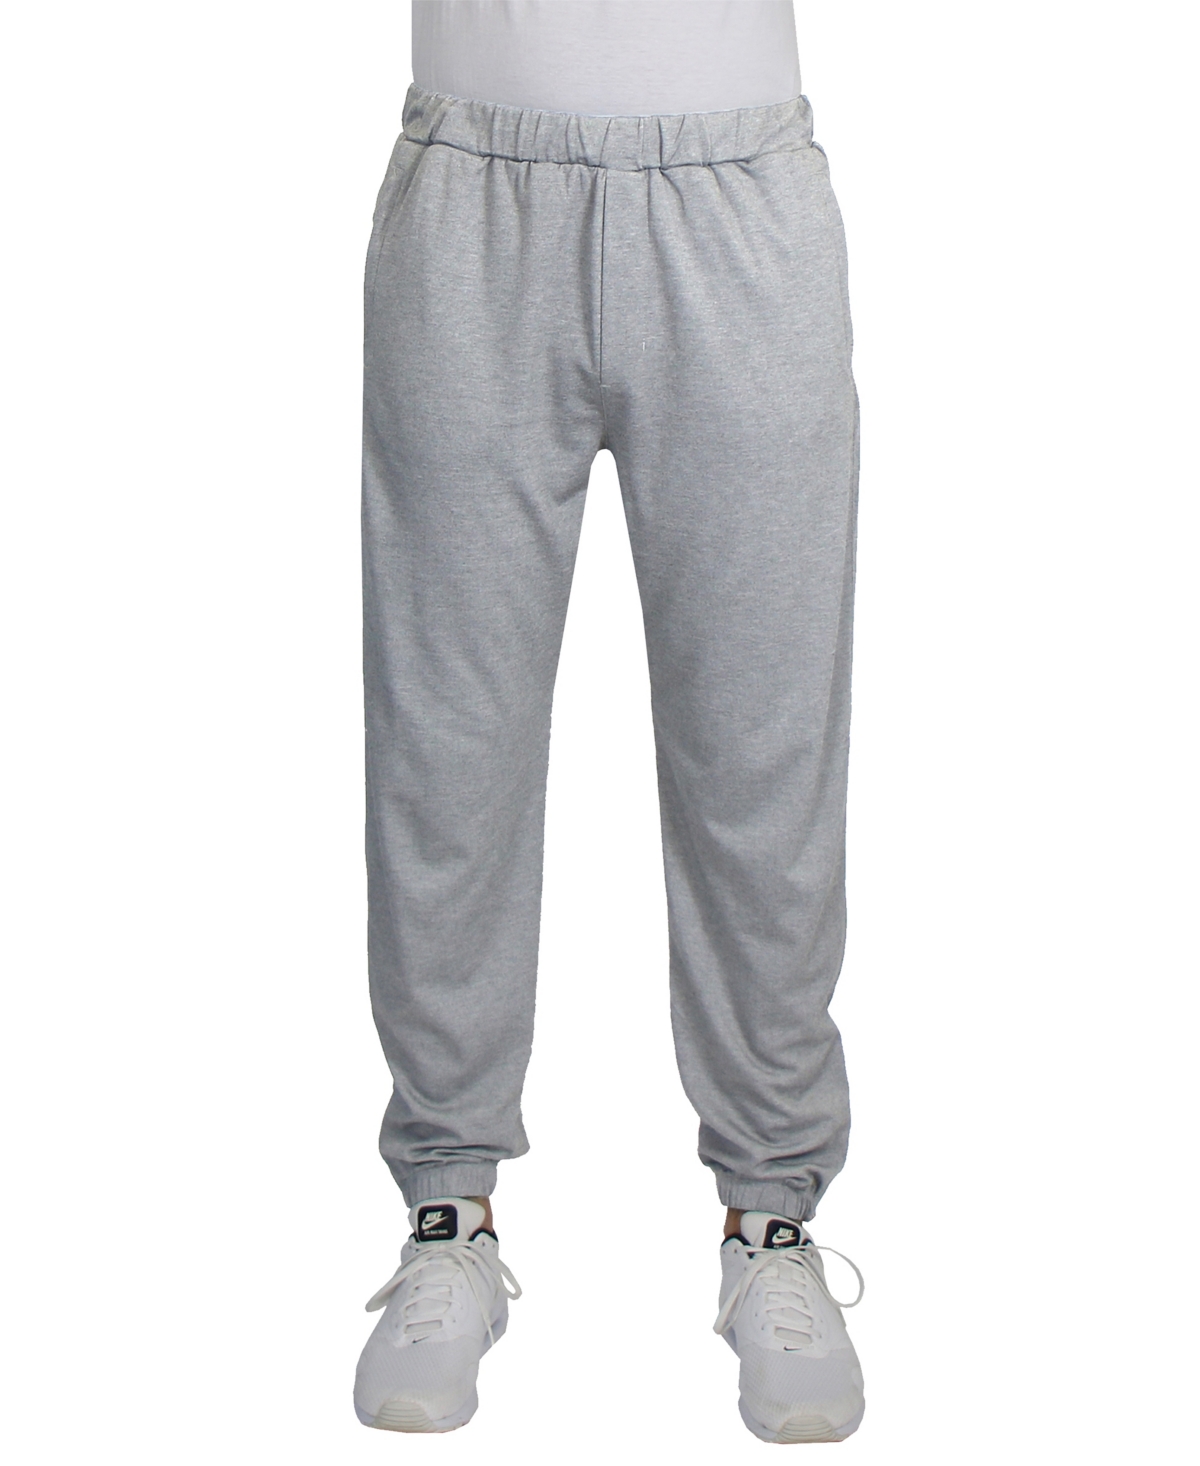 Blue Ice Men's Moisture Wicking Performance Joggers With Reflective Trim Ankle Zippers In Heather Gray